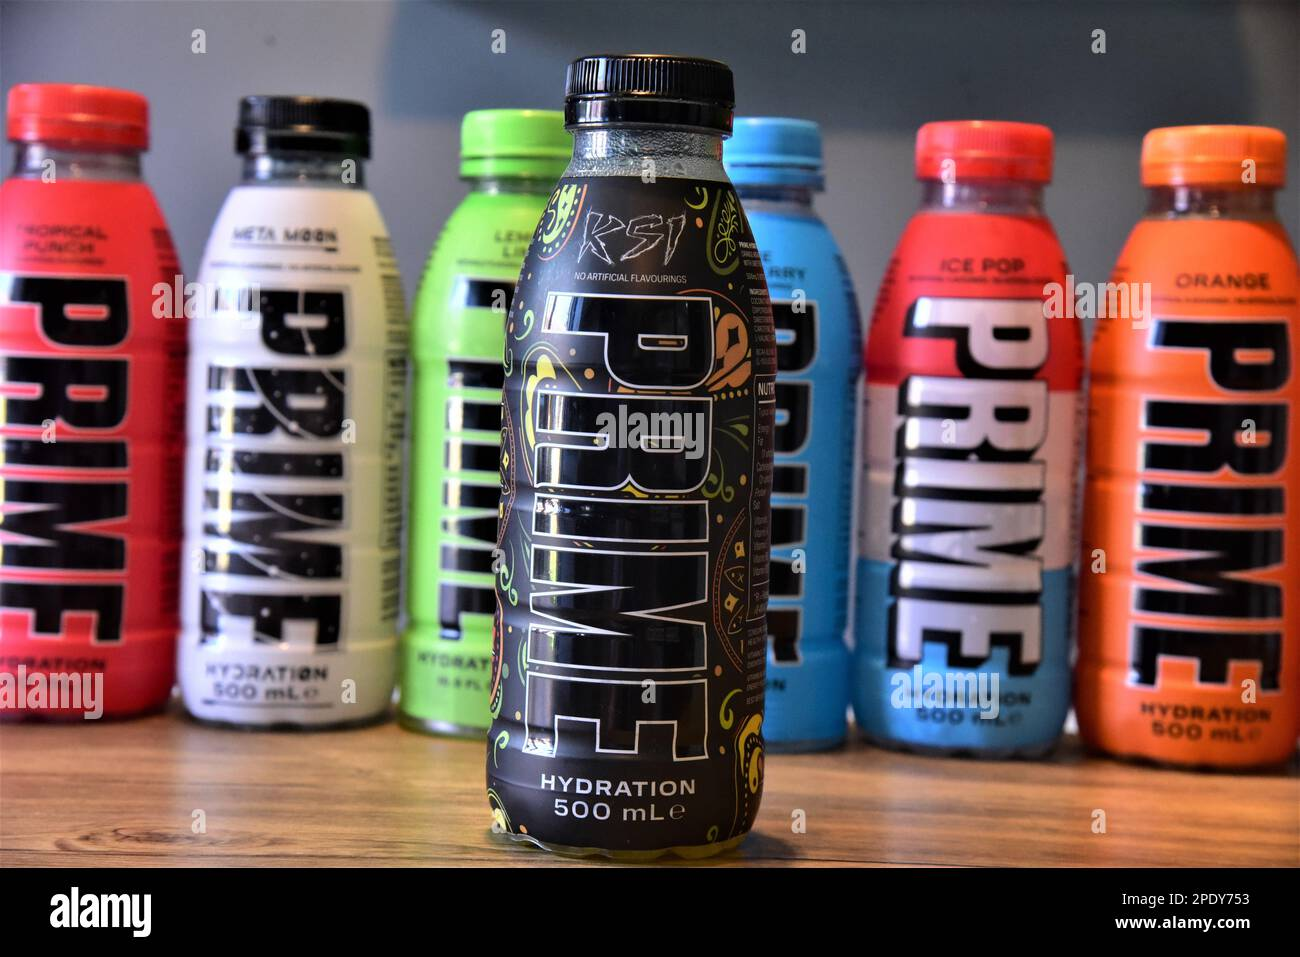 Ksi Prime: Prices Globally, Flavors, & More We Know About this Amazing Drink?